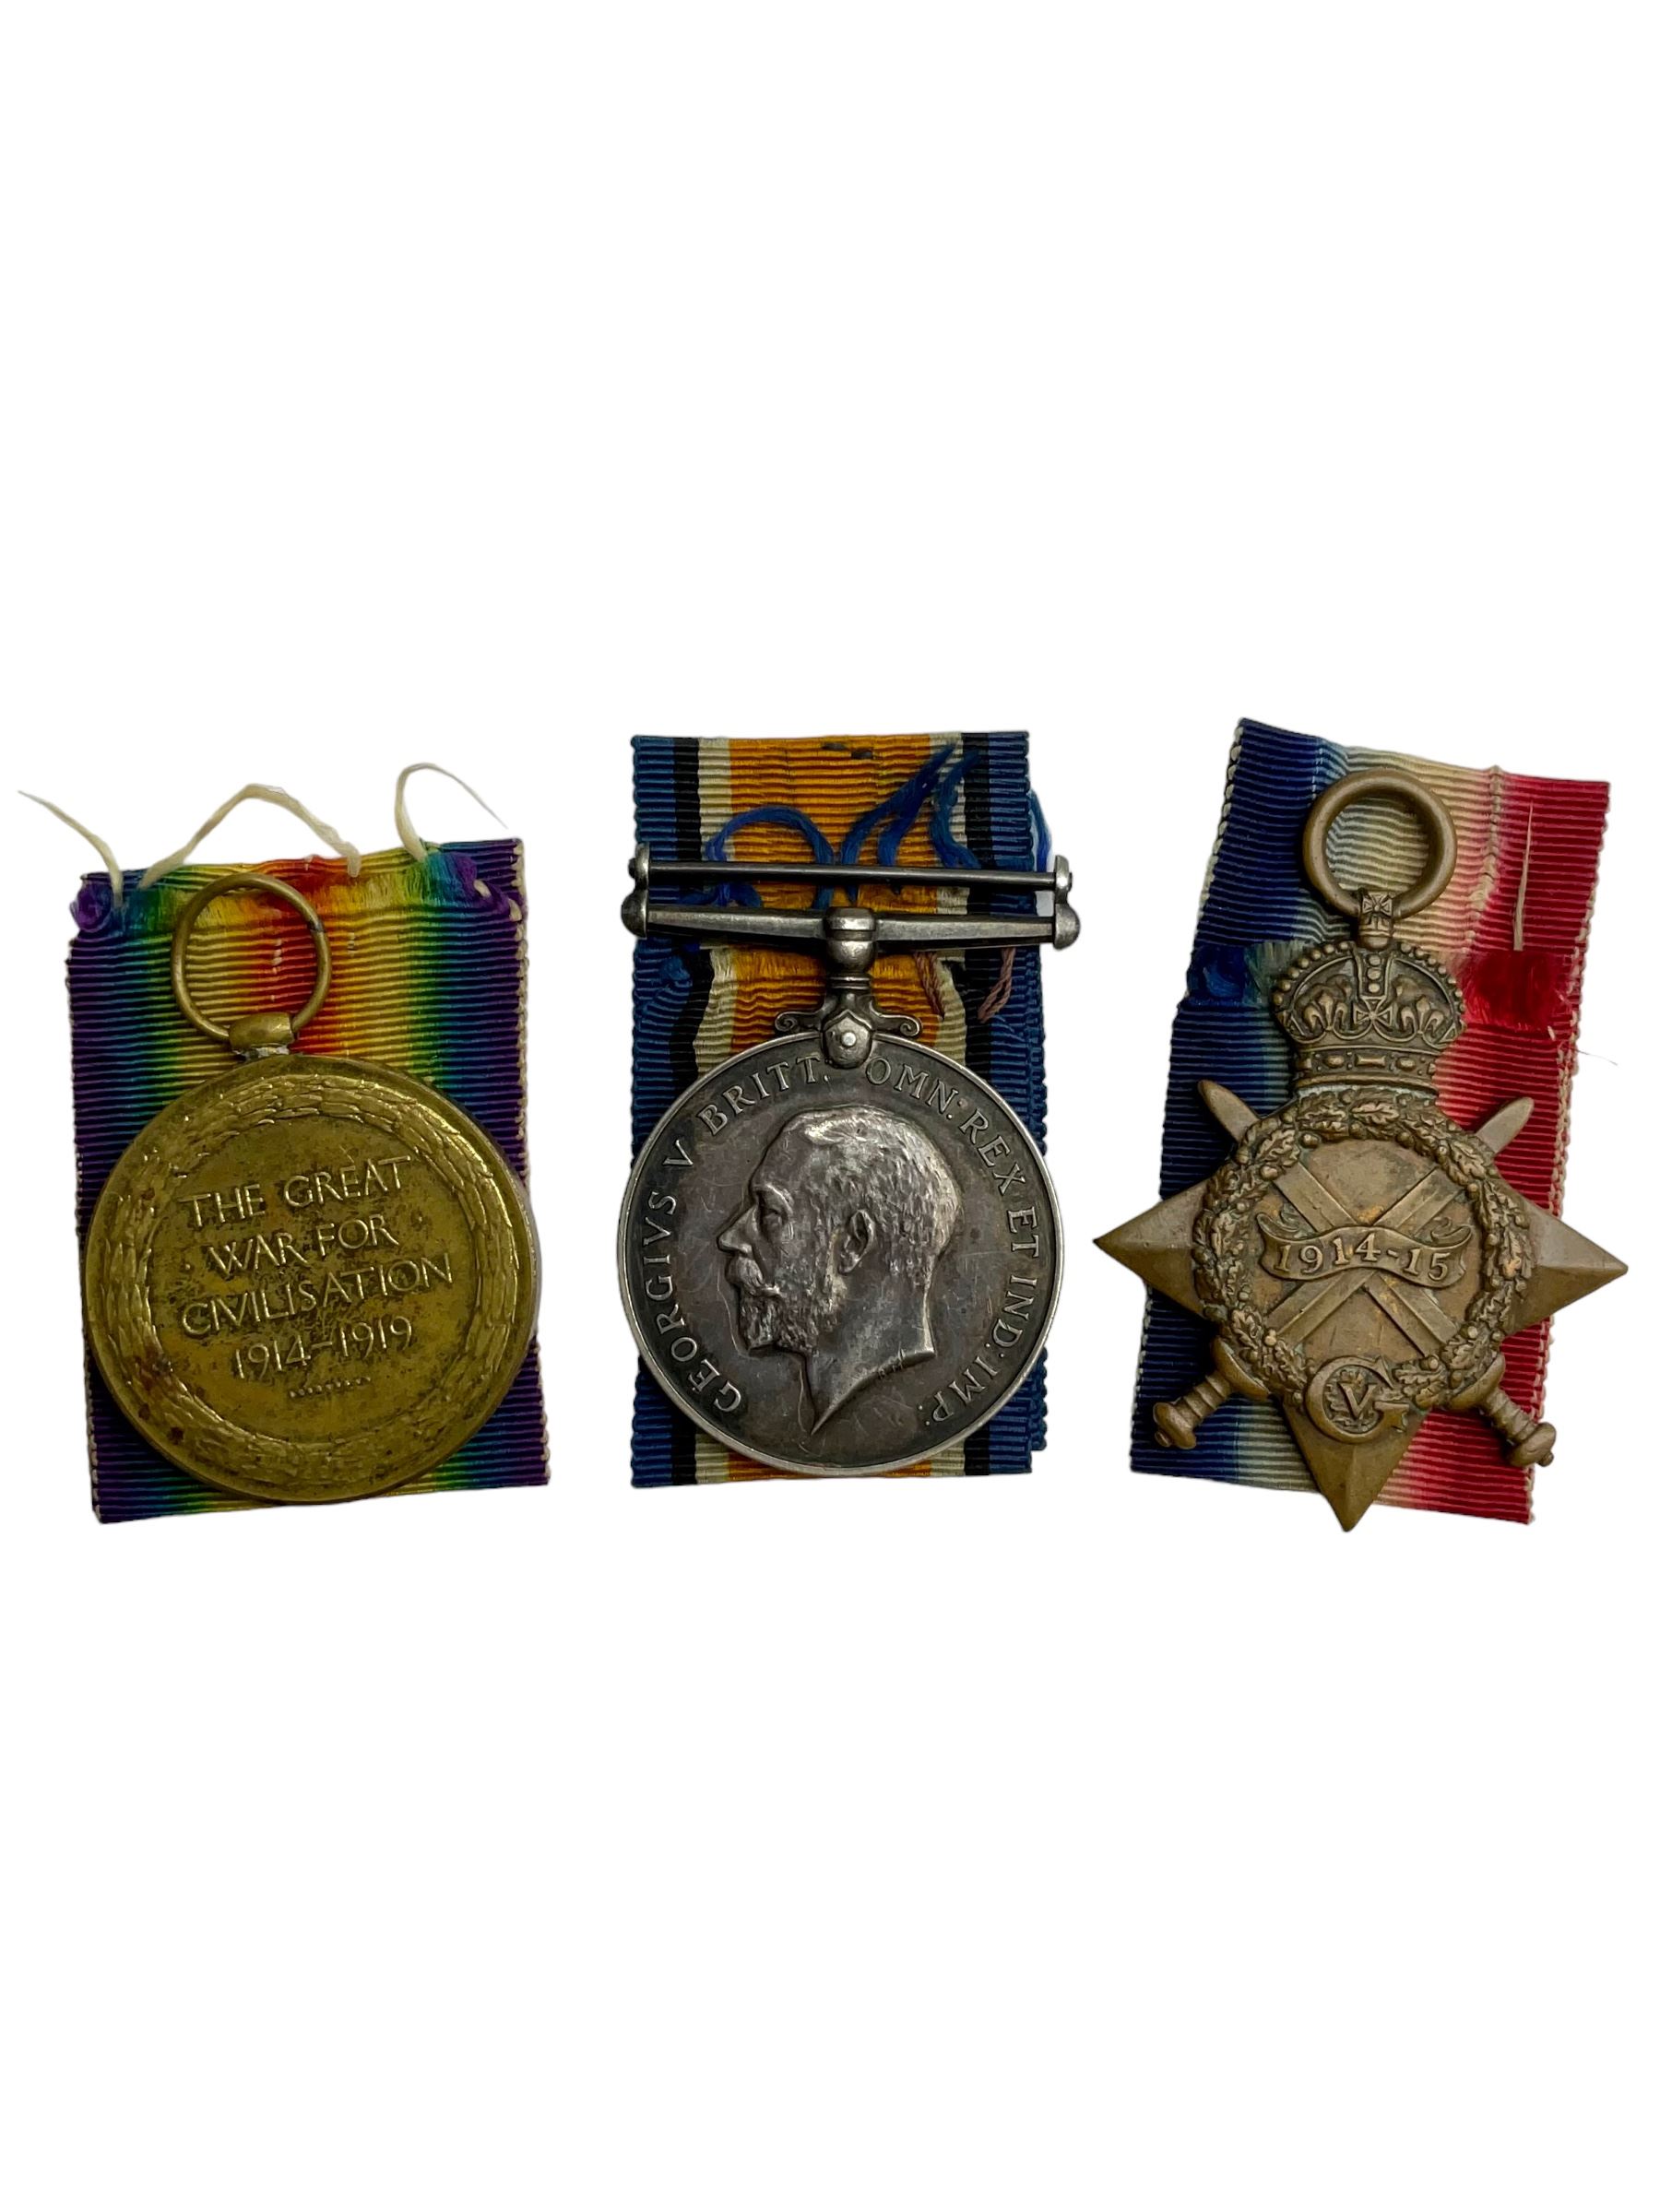 WWI medal pair comprising War and Victory medals named to '1182 GNR. A. HARRISON. R. A.' and 1914-15